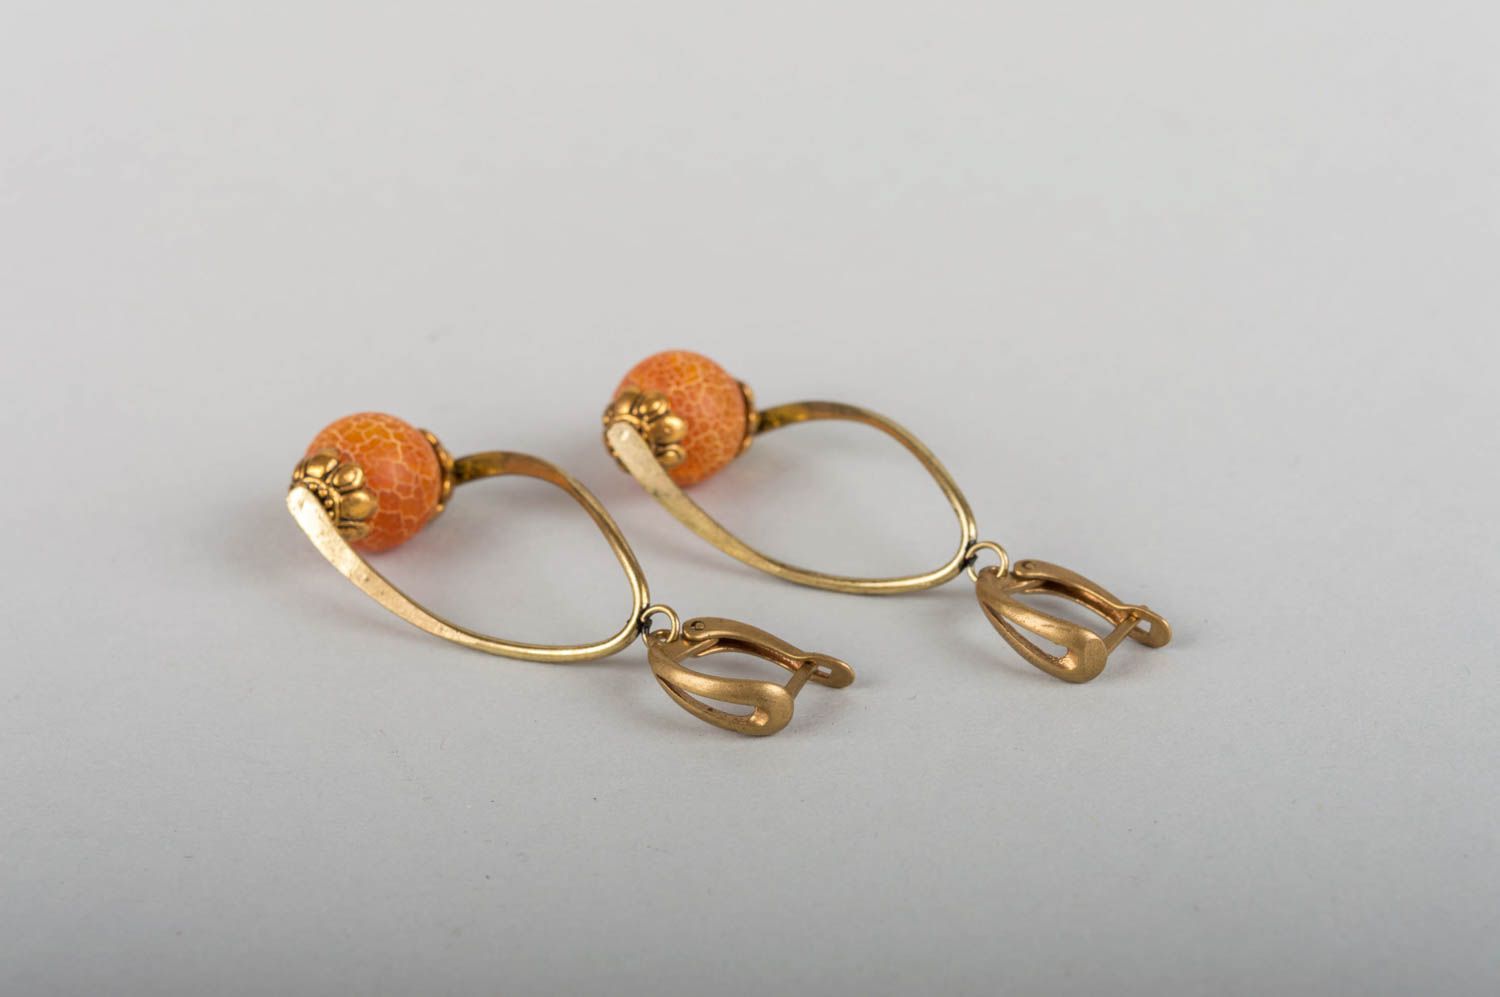 Handmade earrings made of natural stones and brass with agate evening accessory photo 4